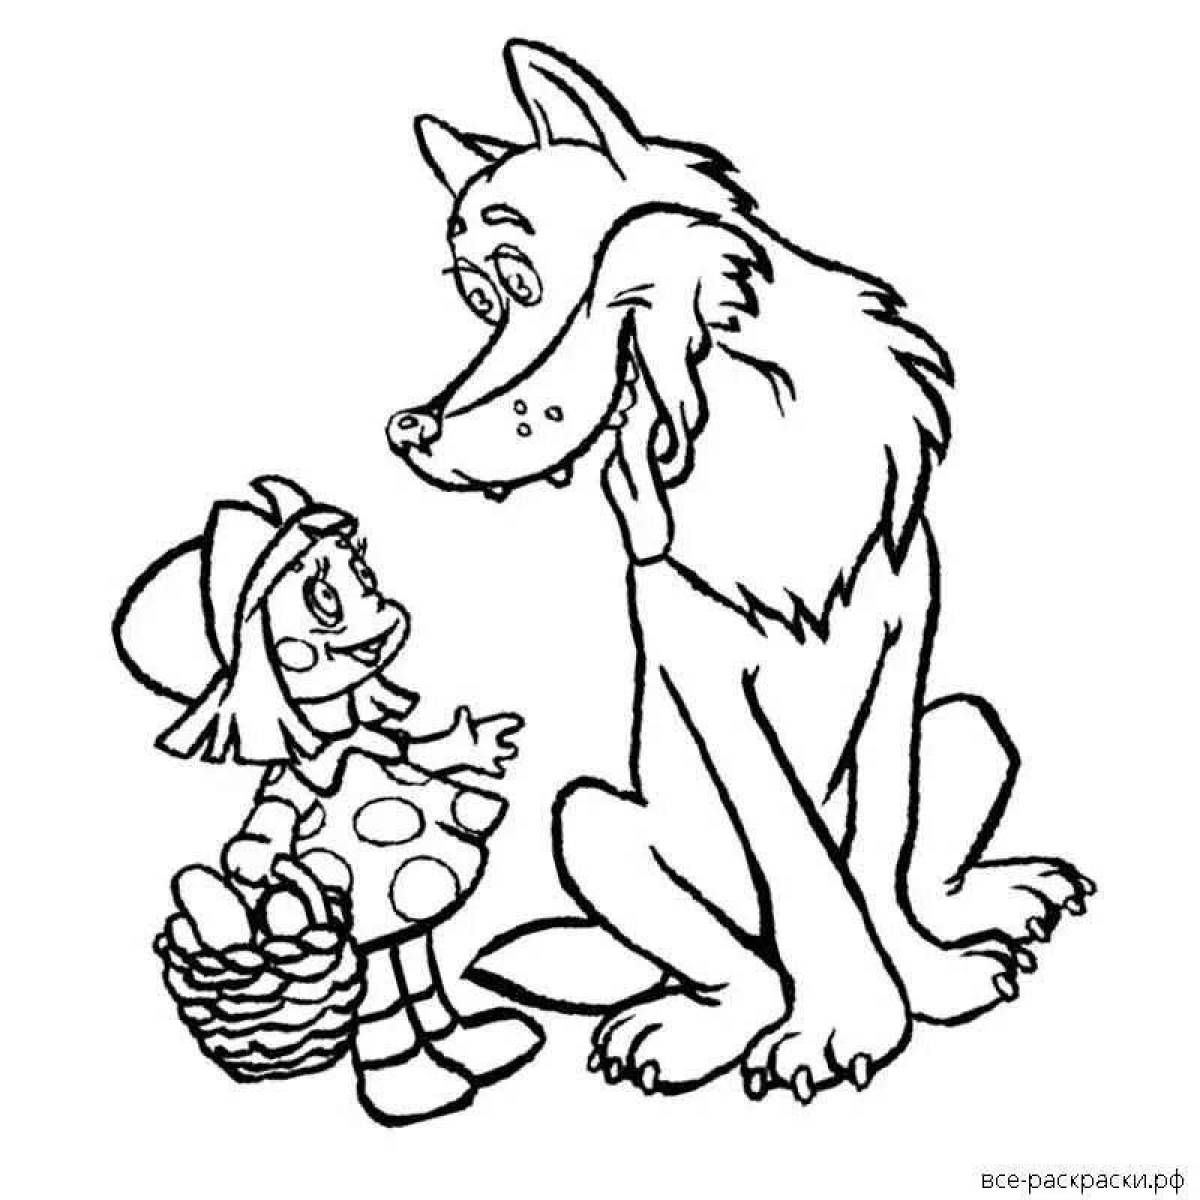 Adorable wolf Christmas coloring book